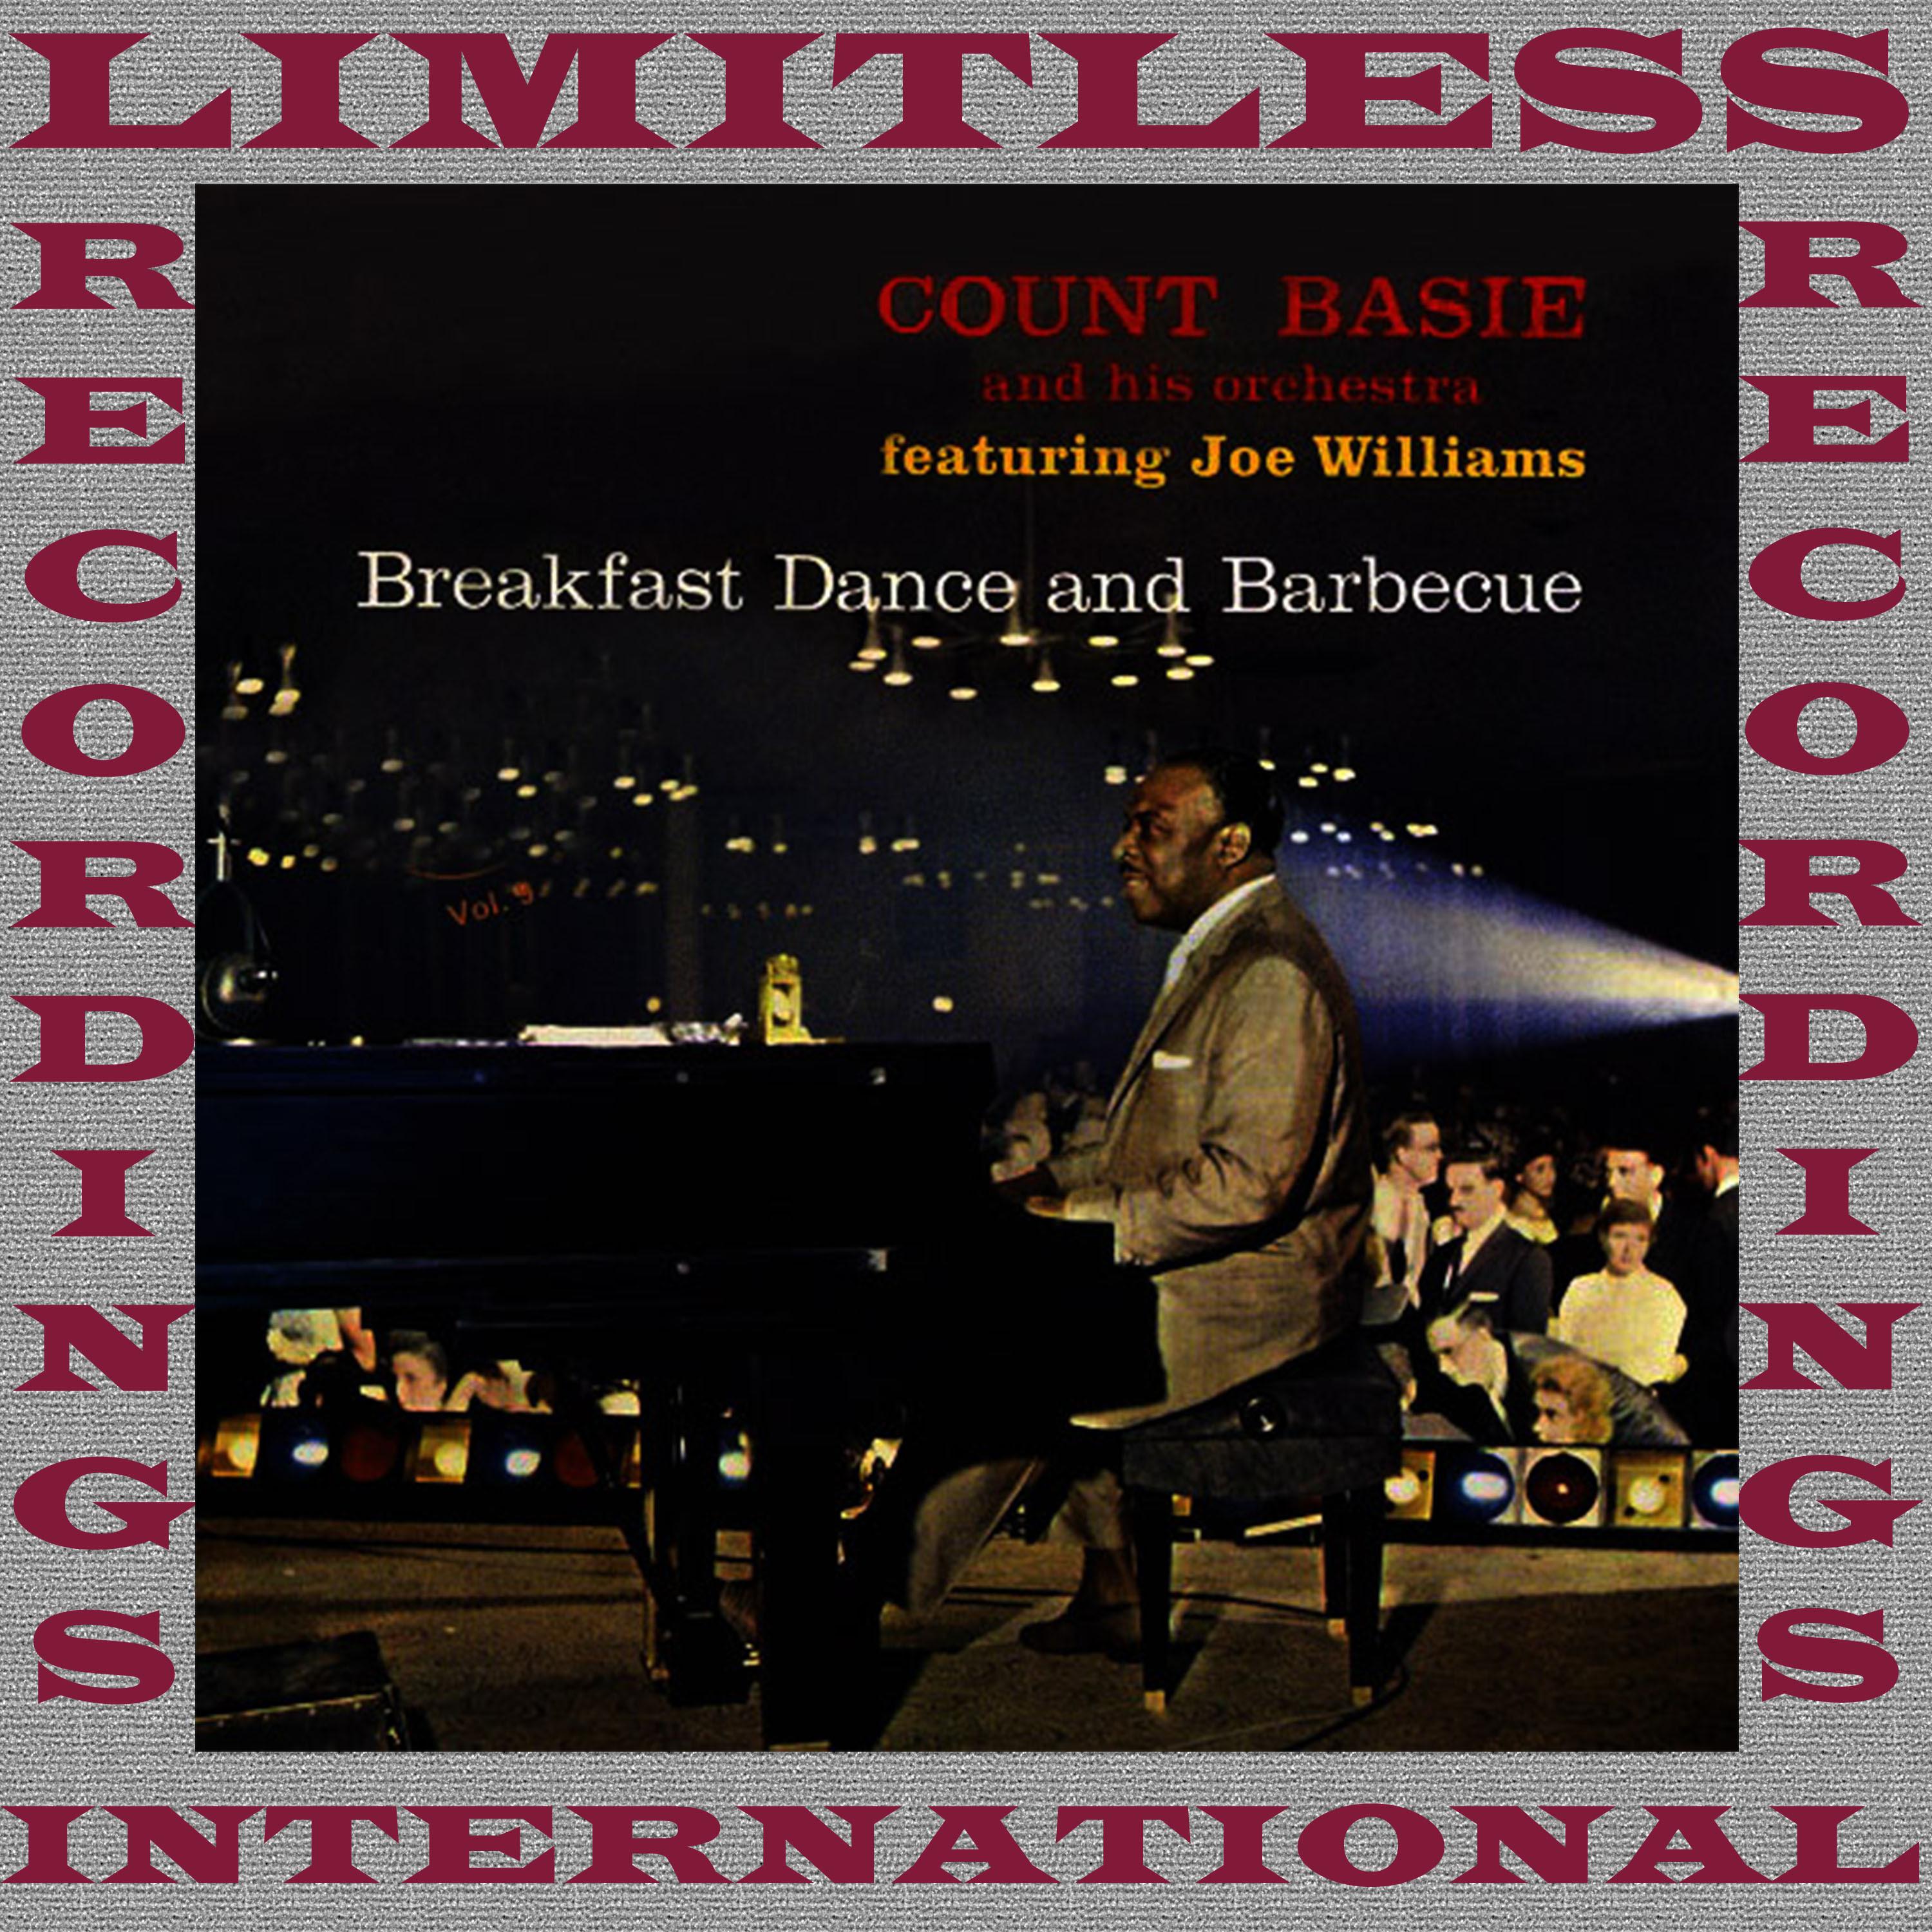 Breakfast Dance And Barbecue (Expanded, Remastered Version)